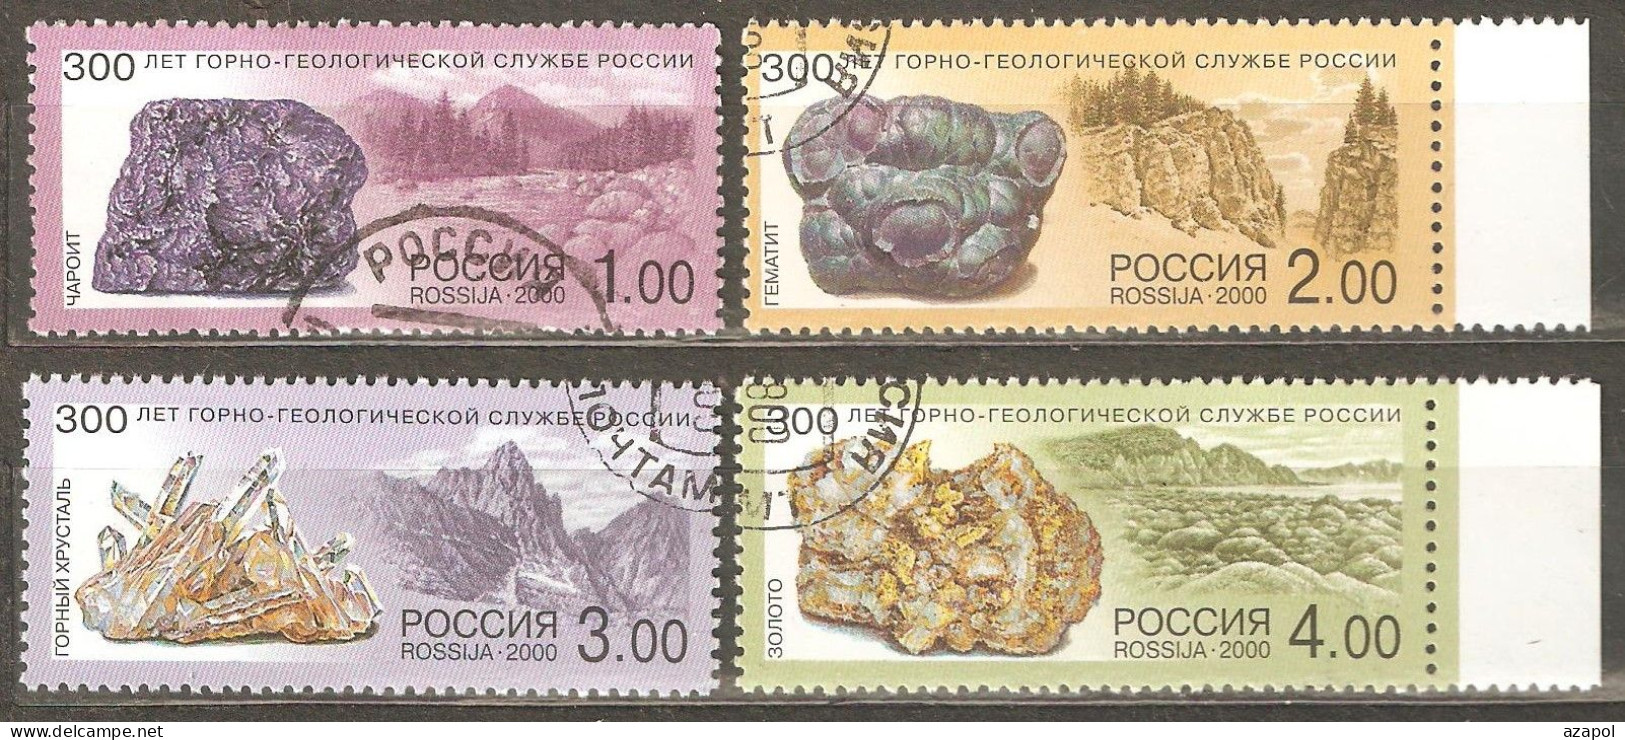 Russia: Full Set Of 4 Used Stamps, 300 Years Of Rock-Geological Service, 2000, Mi#845-8 - Usati